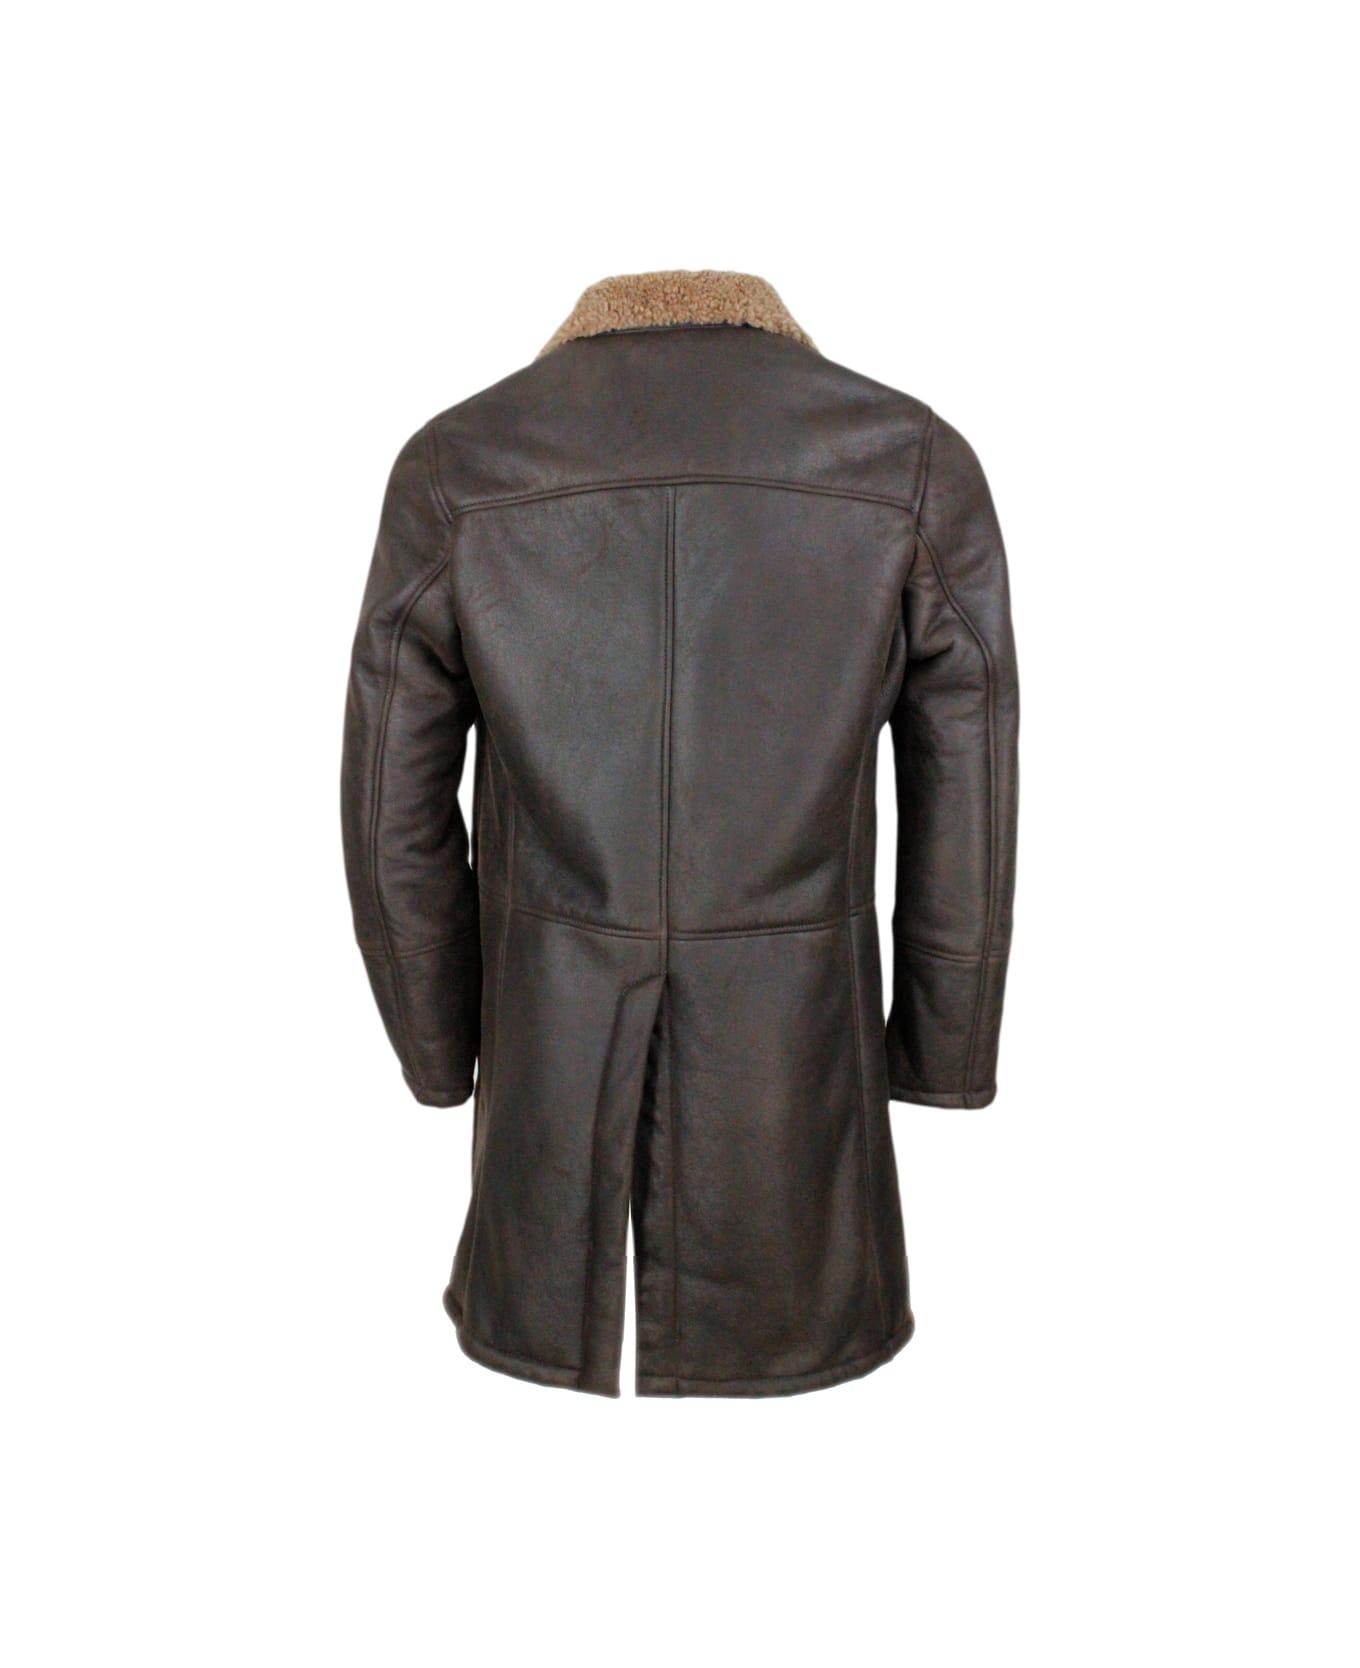 Barba Napoli Single-breasted Shearling Sheepskin Coat With Button Closure And Side Pockets - Brown